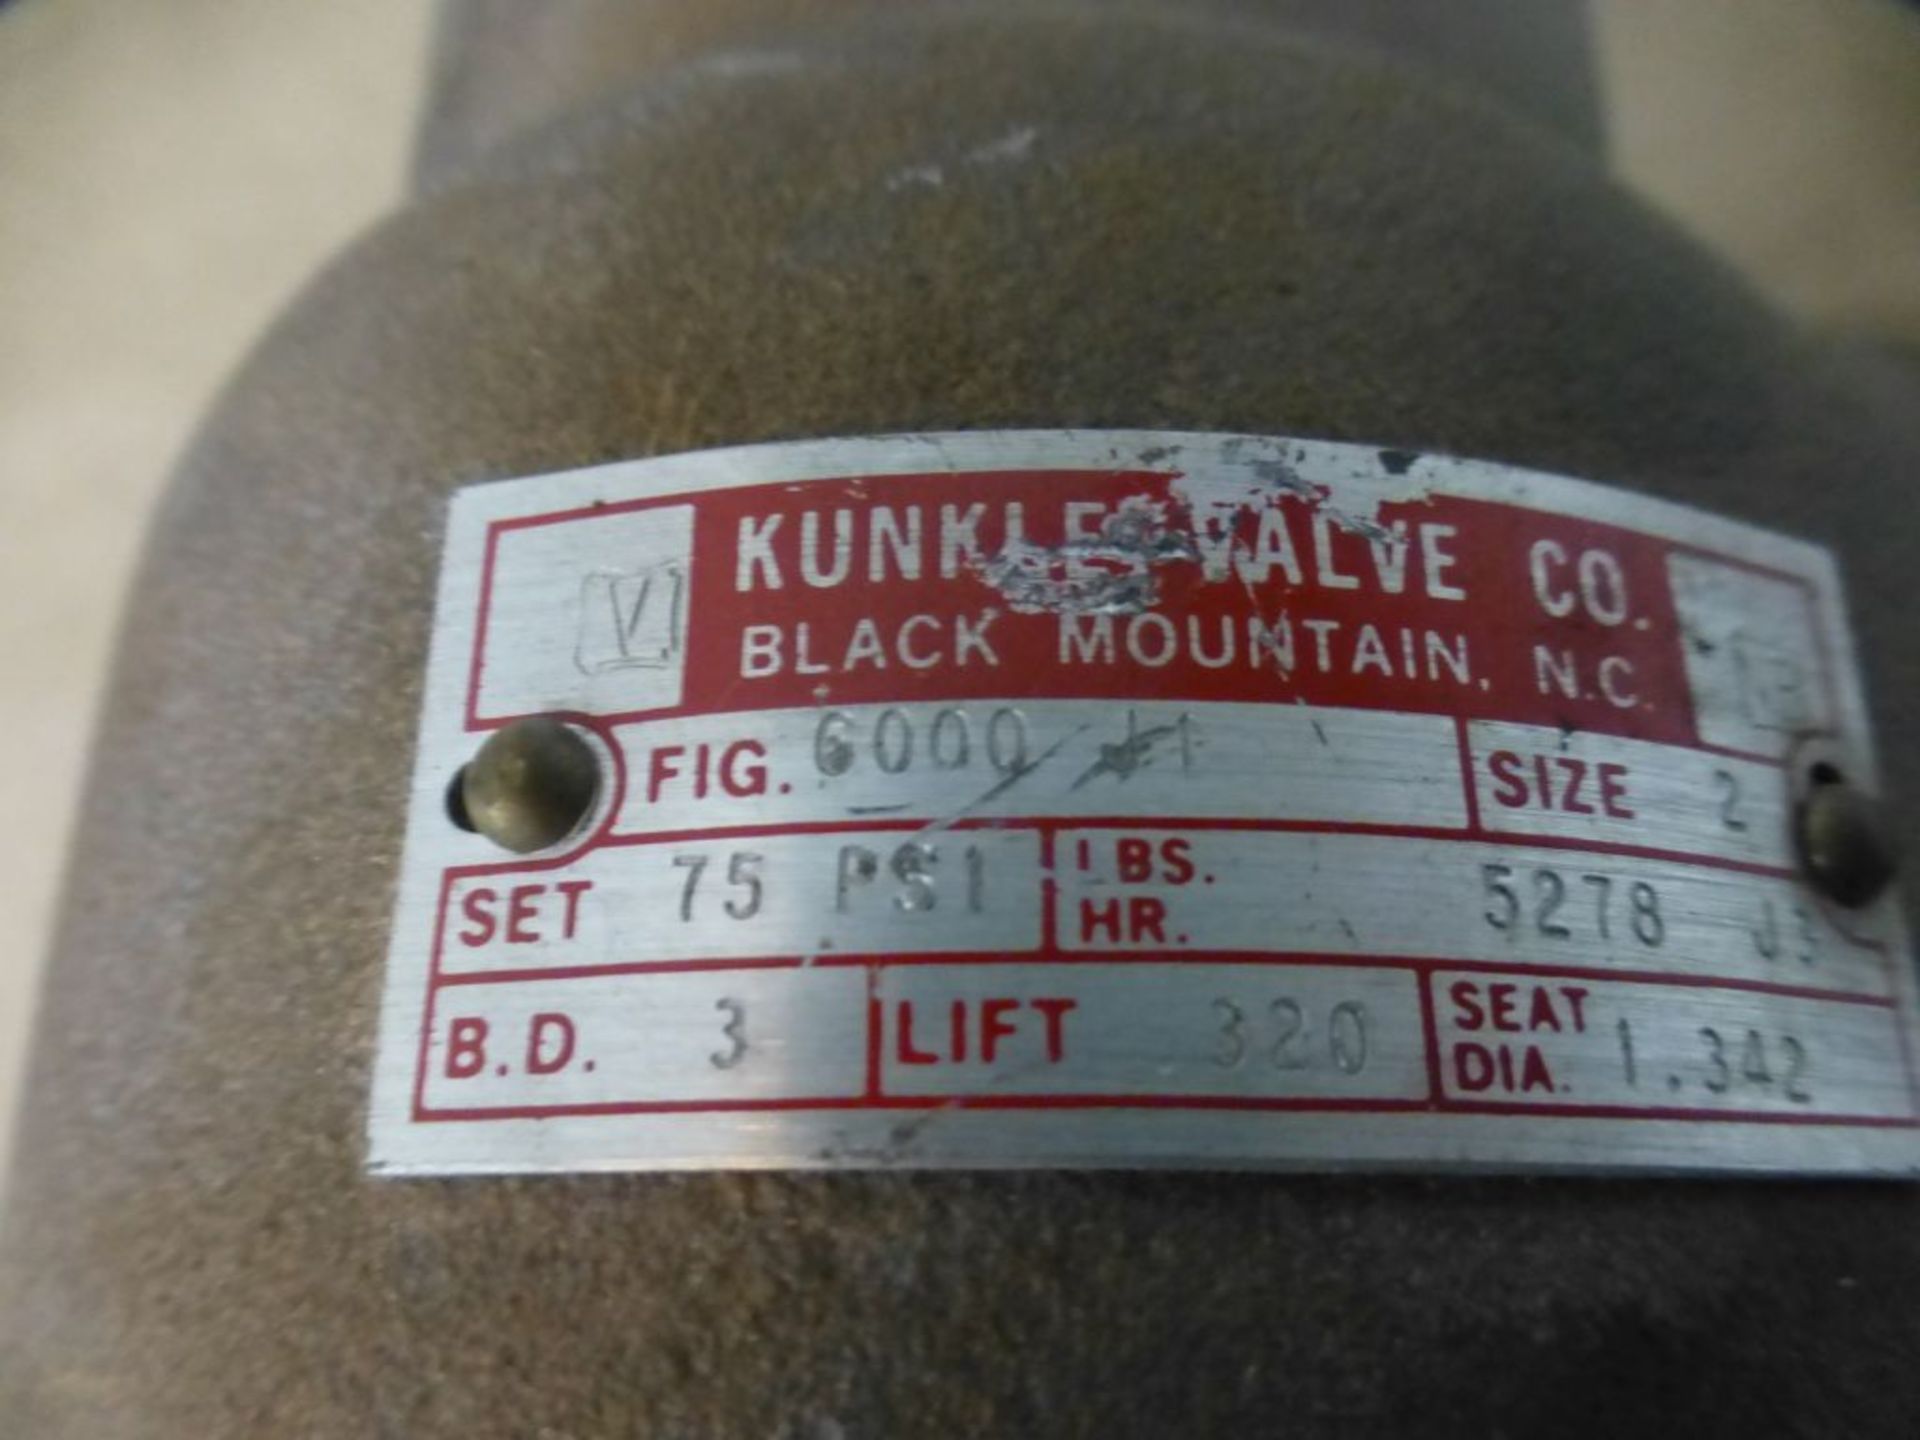 Lot of Assorted Valves|(2) Kunkle Valves, Size: 2", 75 PSI; (1) Dresser Consolidated Relief Valves, - Image 12 of 22